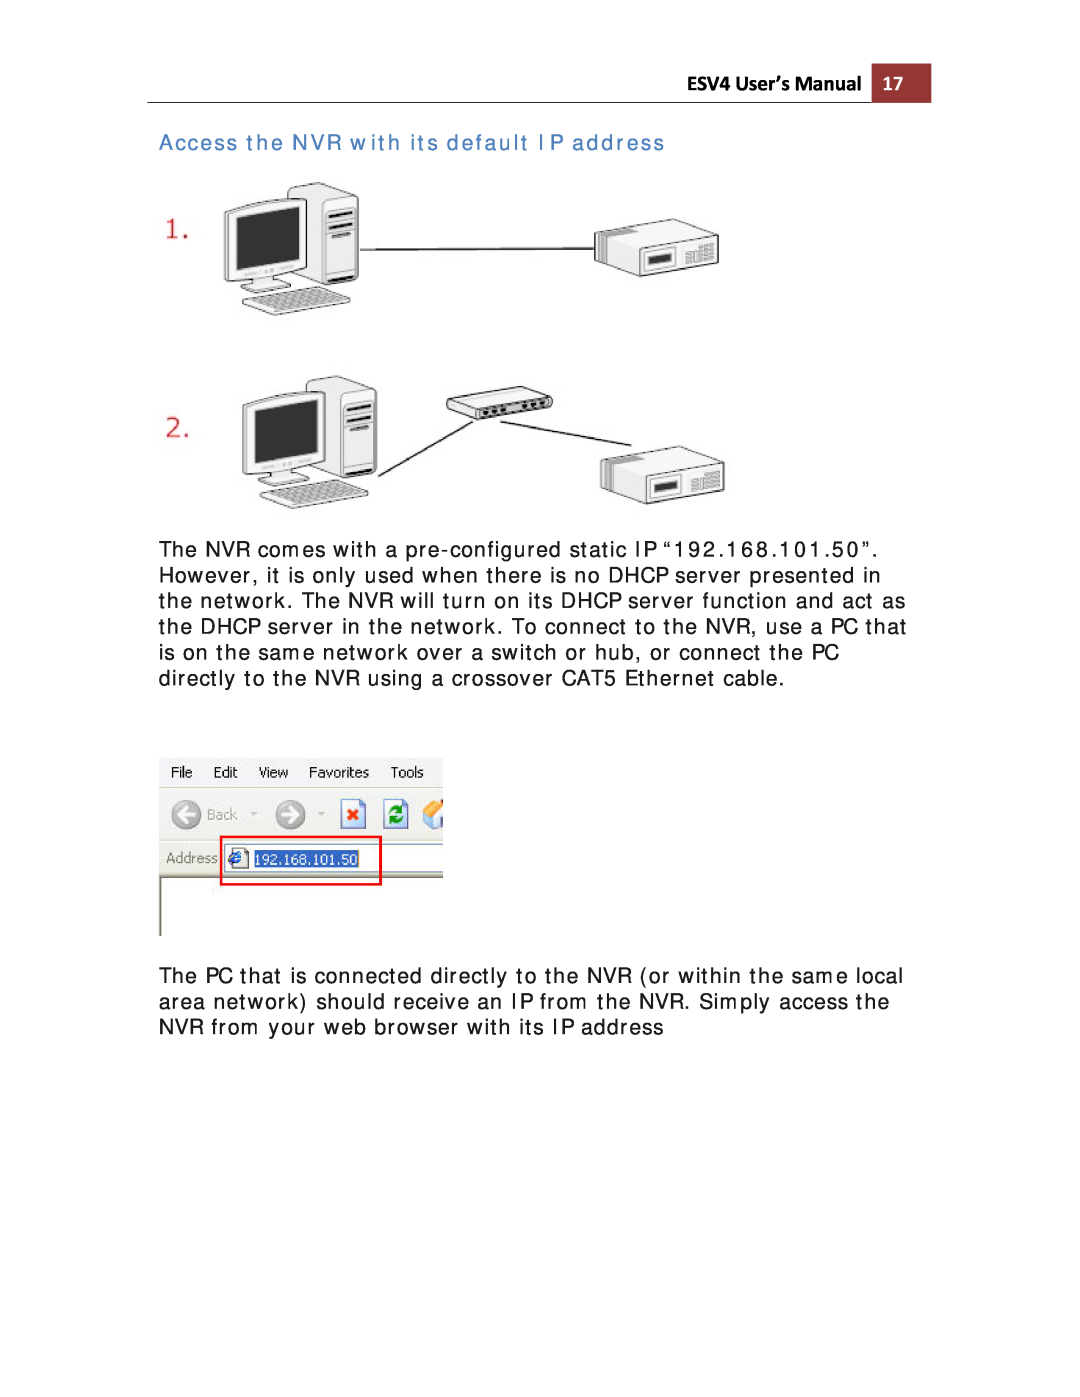 Toshiba ESV41T user manual Access the NVR with its default IP address, ESV4 User’s Manual 